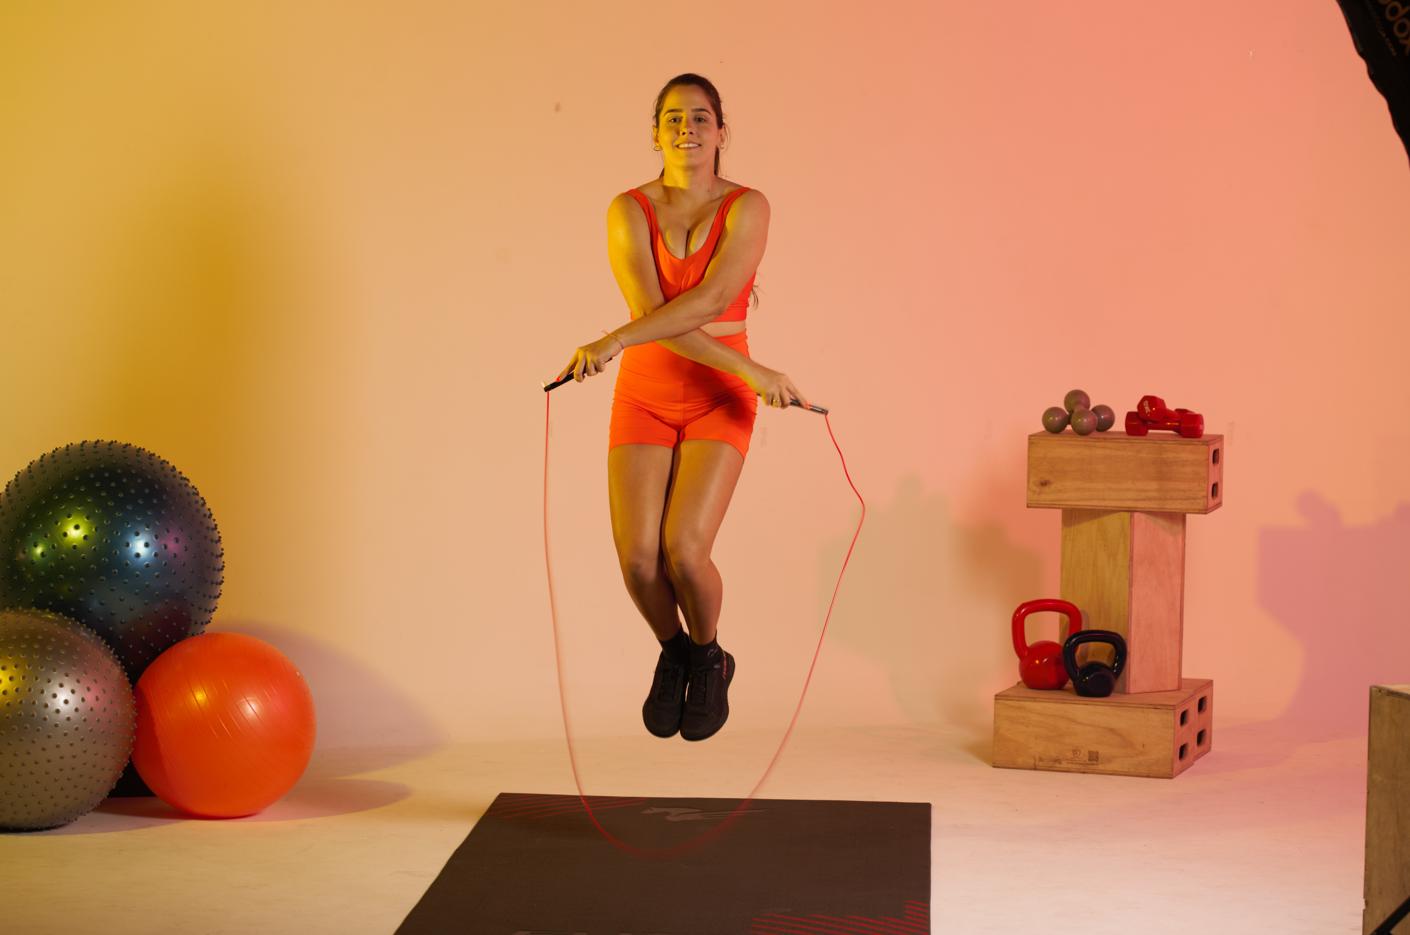 15-Minute Jump Rope Workout Exercise Routine